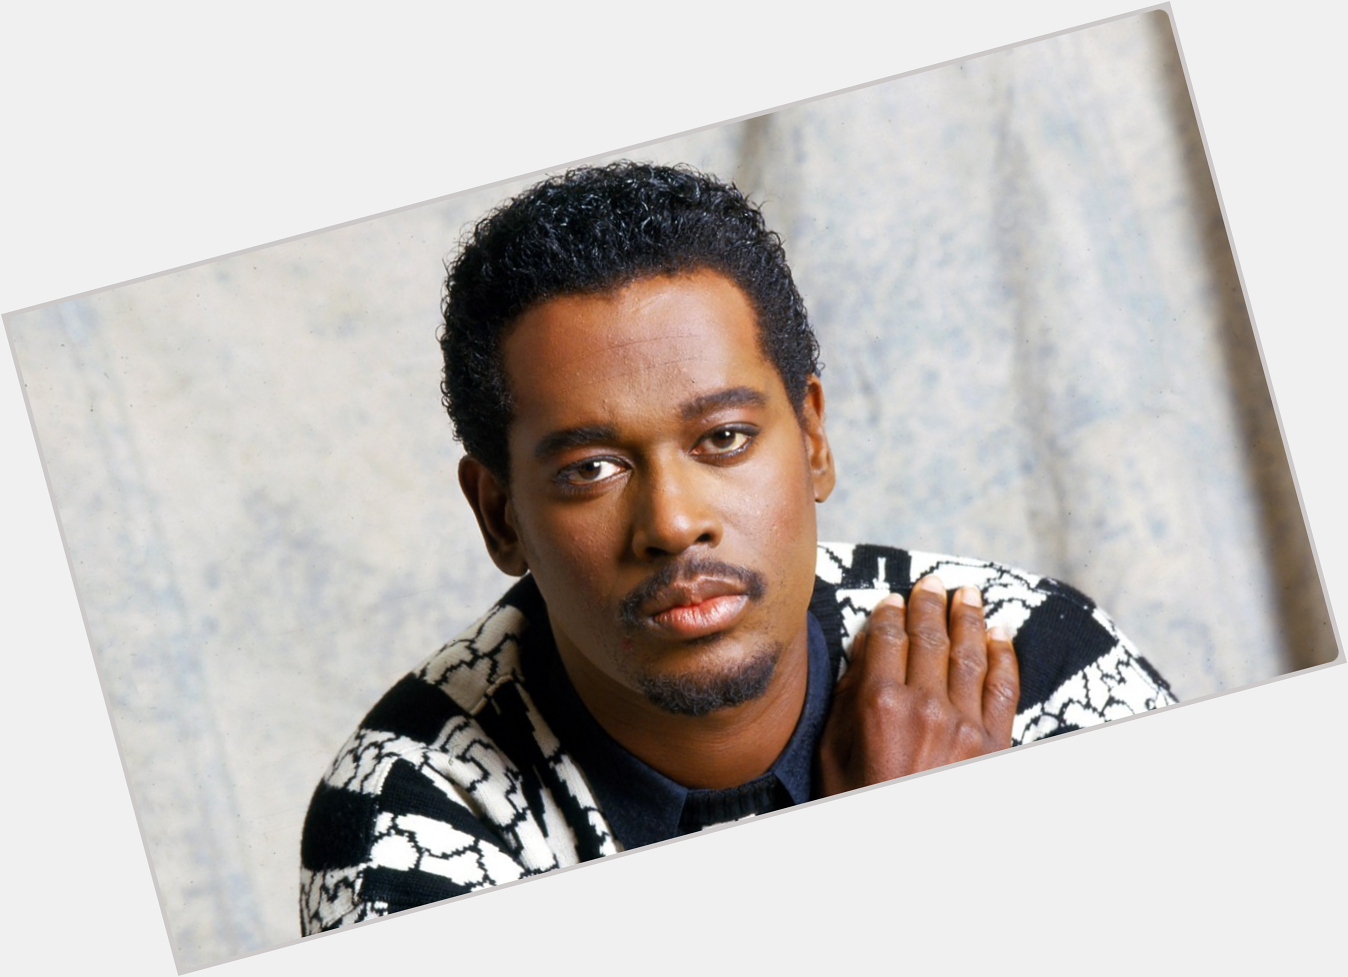 Happy Birthday to Luther Vandross, who would have turned 65 today! 